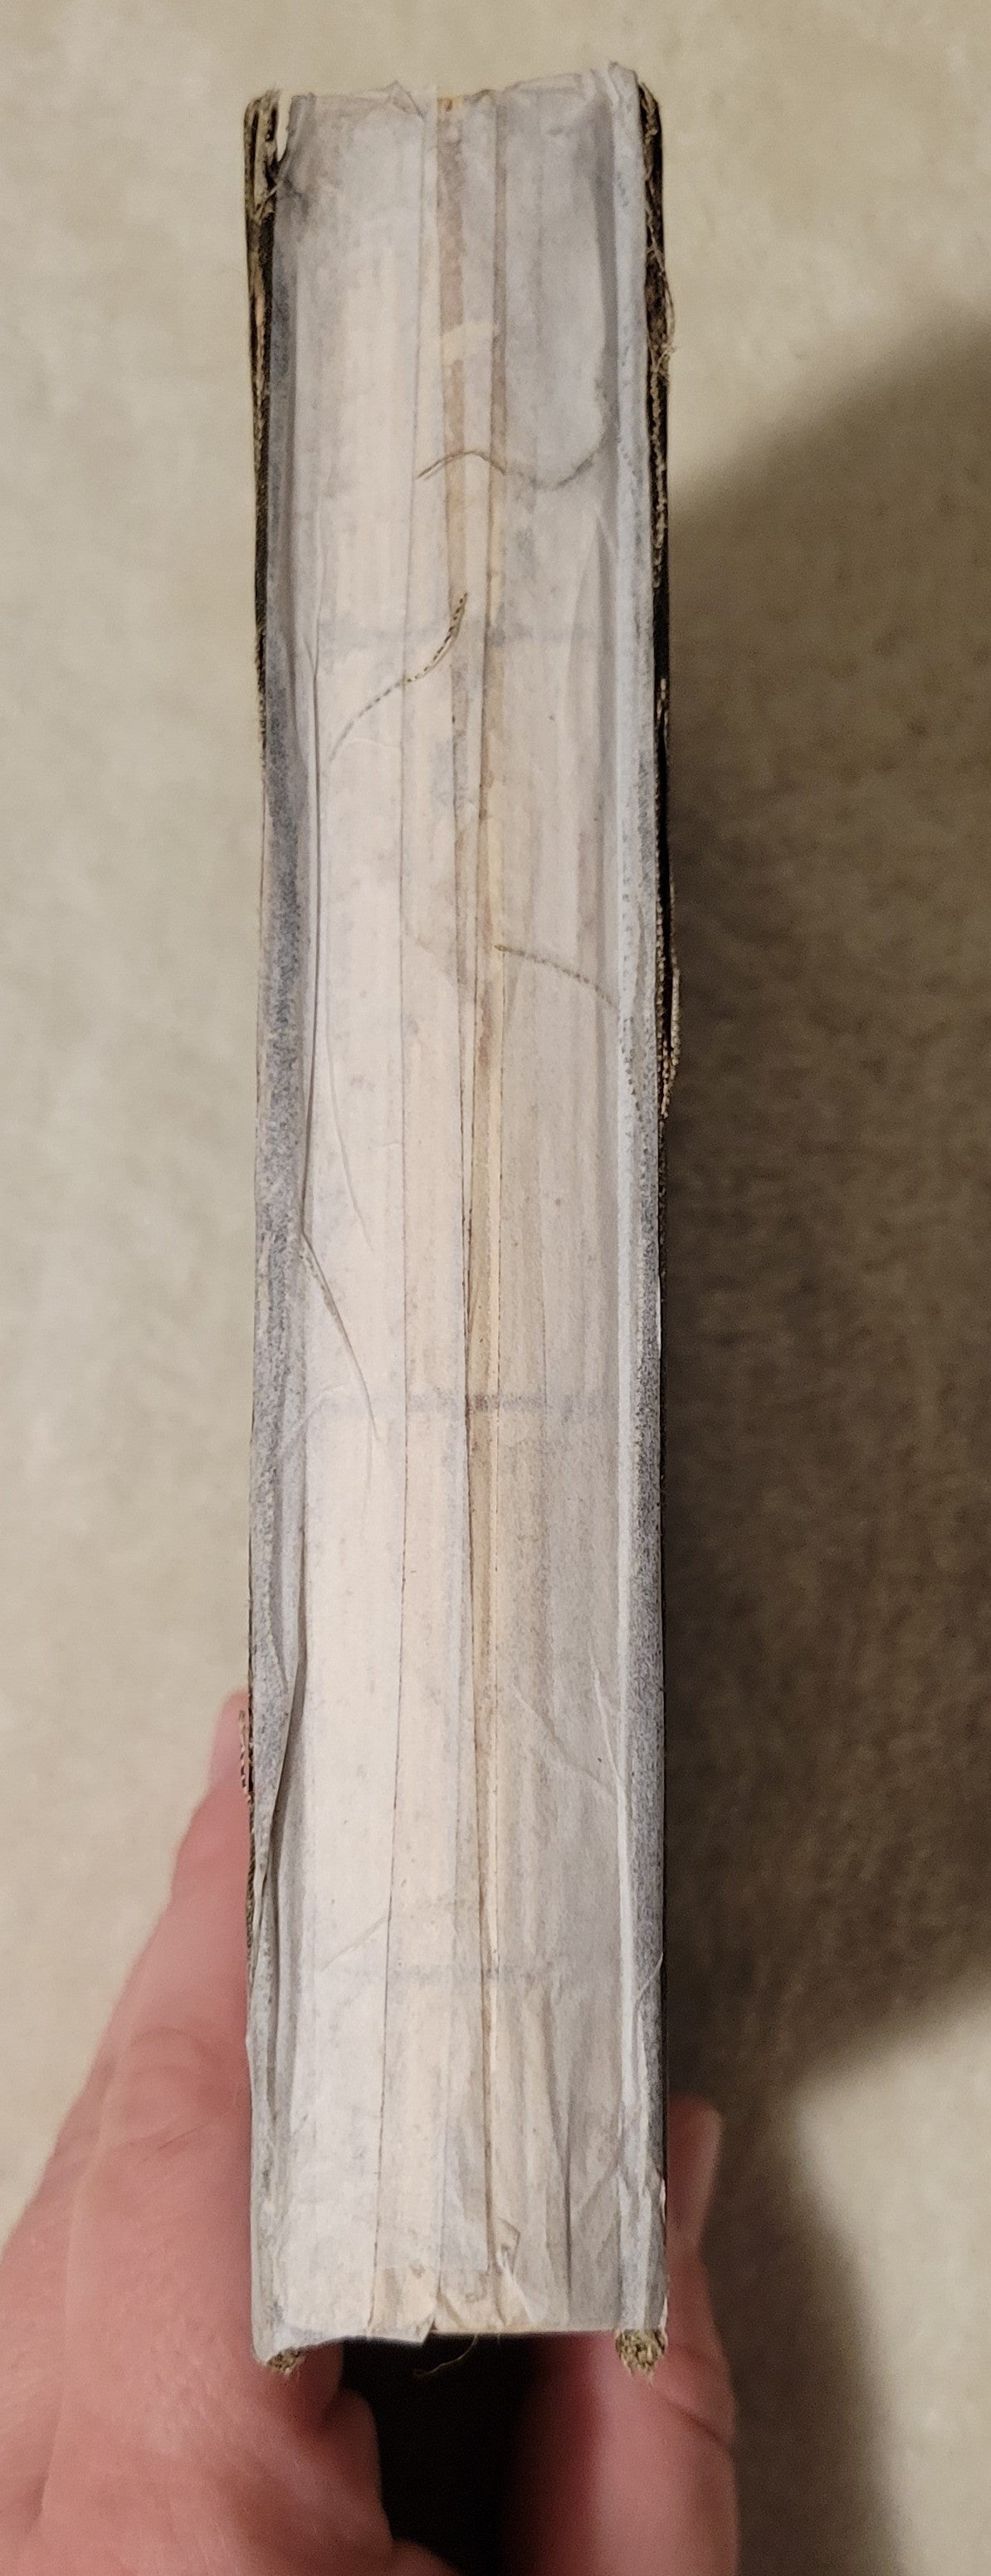 Antique book for sale, "The New Testament of the Our Lord and Saviour Jesus Christ", Oxford University Press, 1881. View of spine.